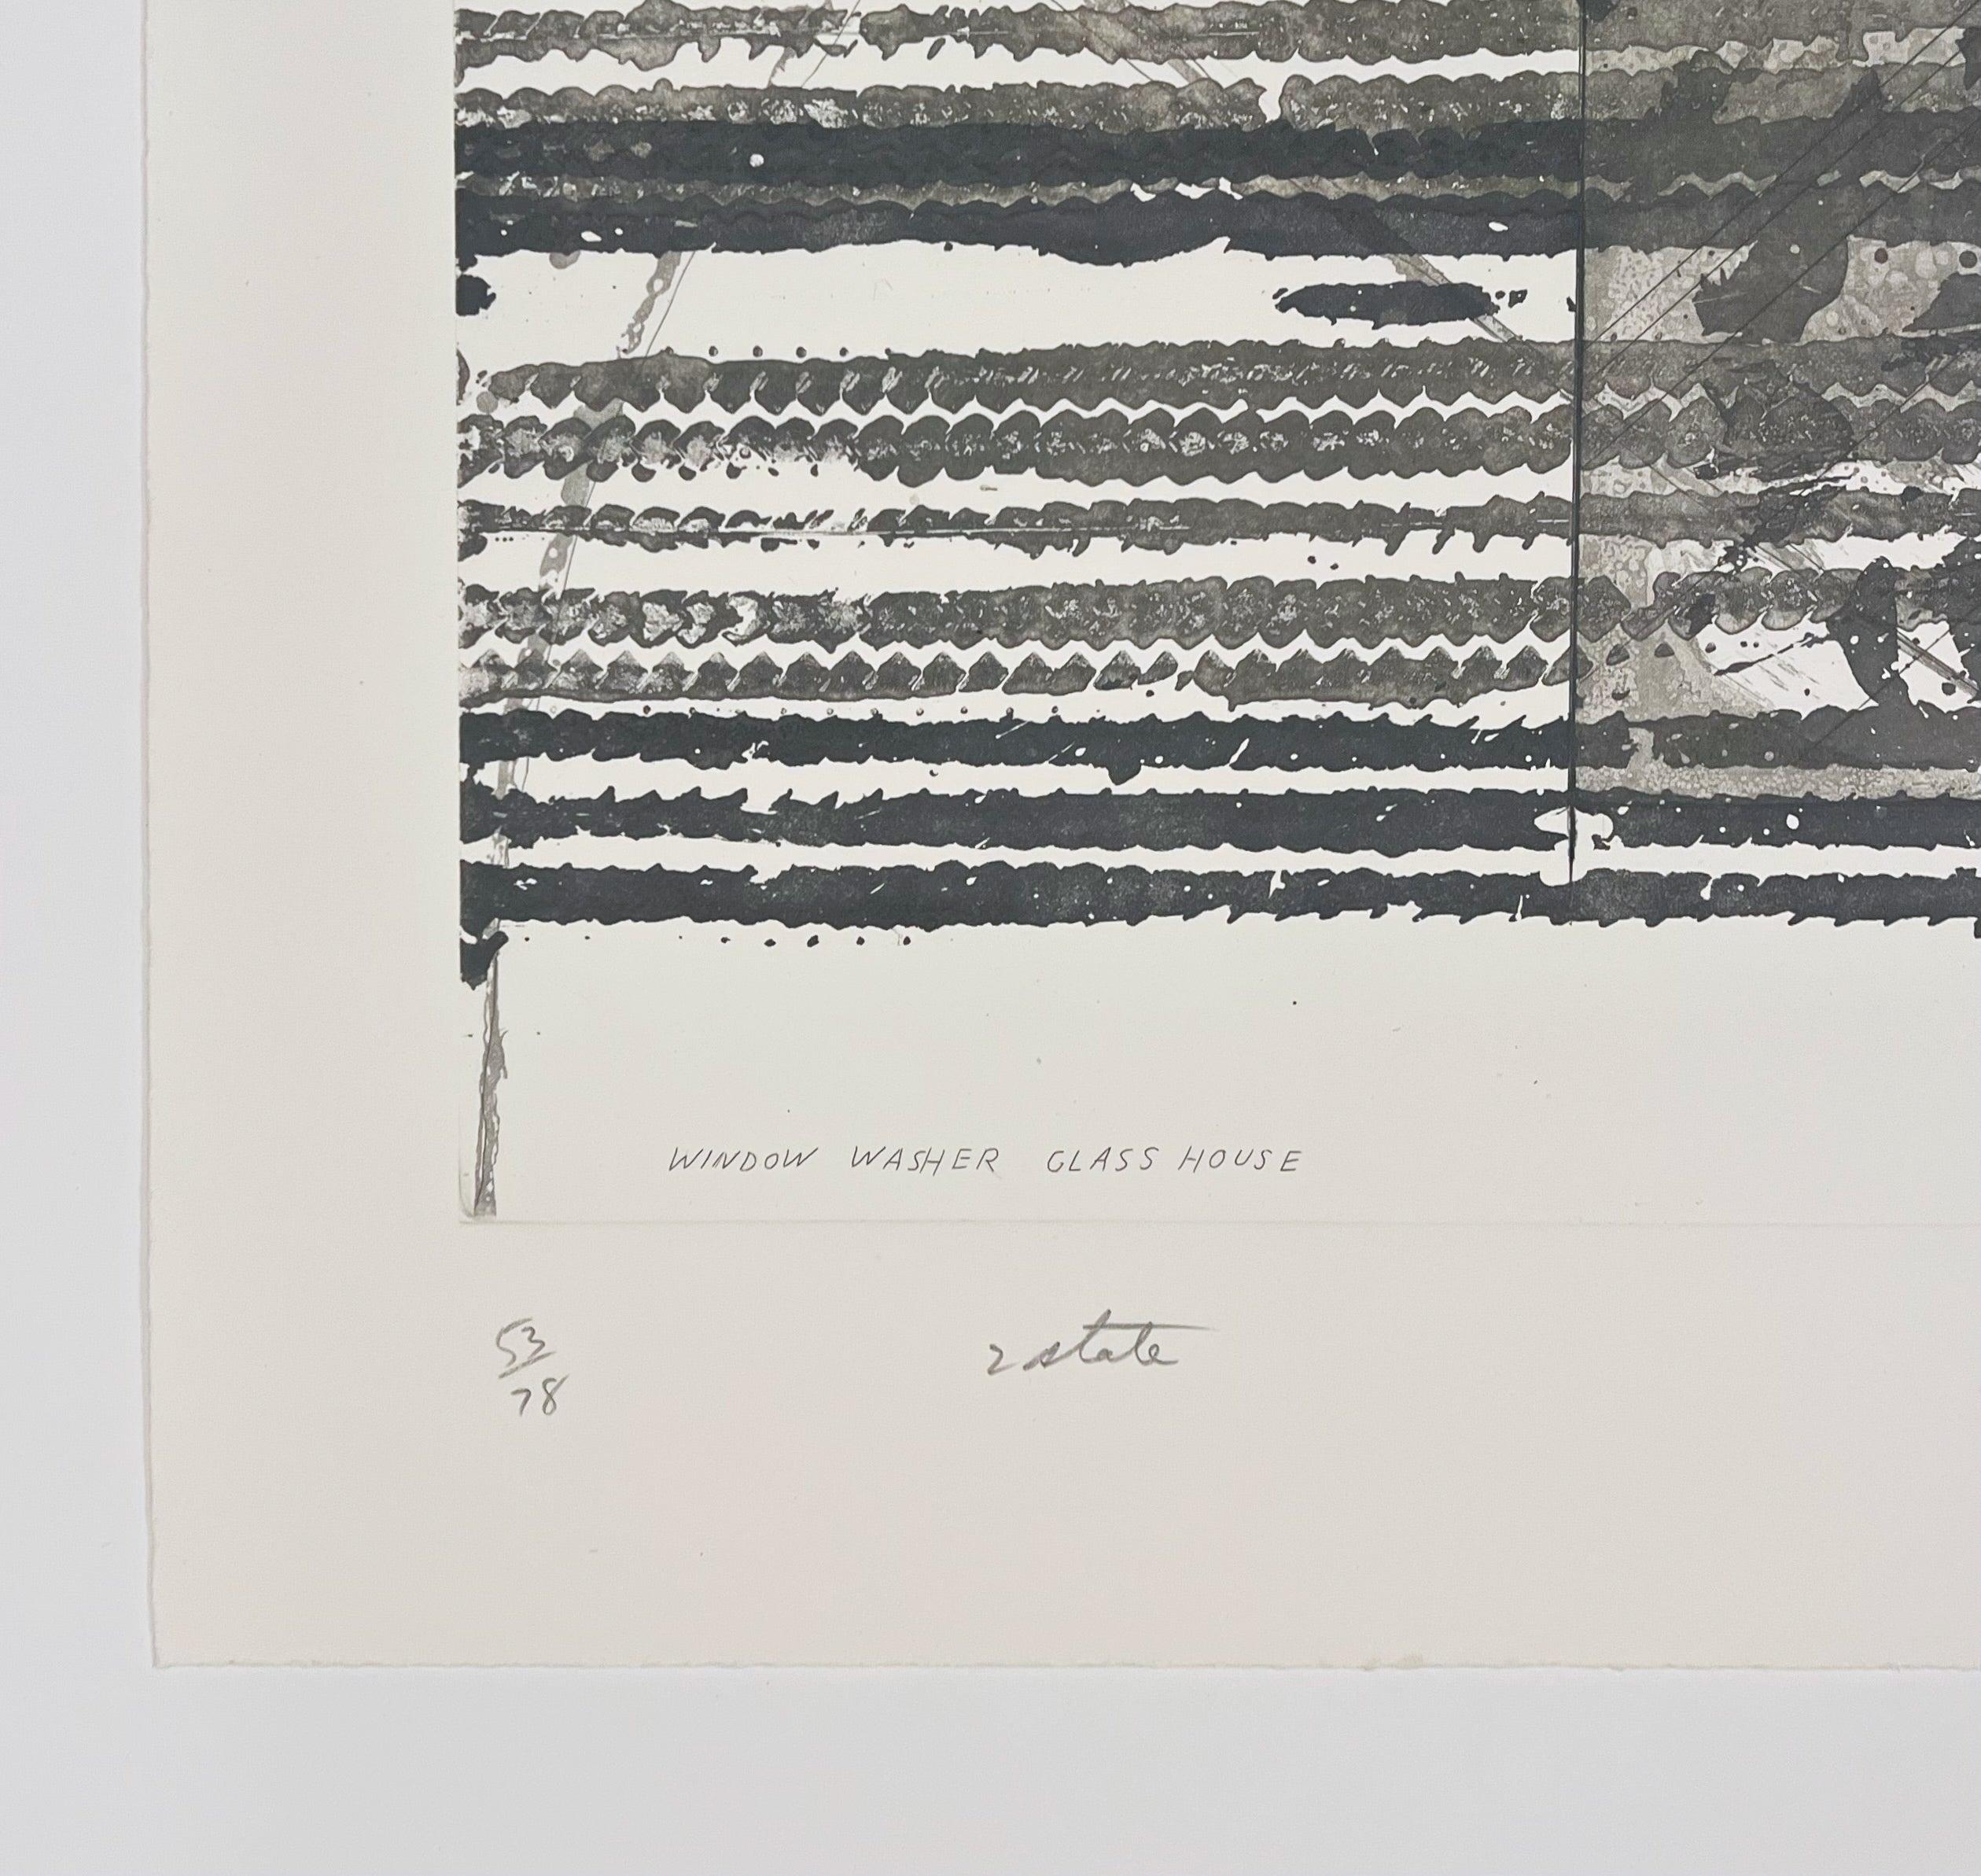 Artist: James Rosenquist
Title: Window Washer Glass House (State 2)
Medium: Intaglio and relief printed in dark gray and embossing
Date: 1978
Edition: 53/78
Sheet Size: 23